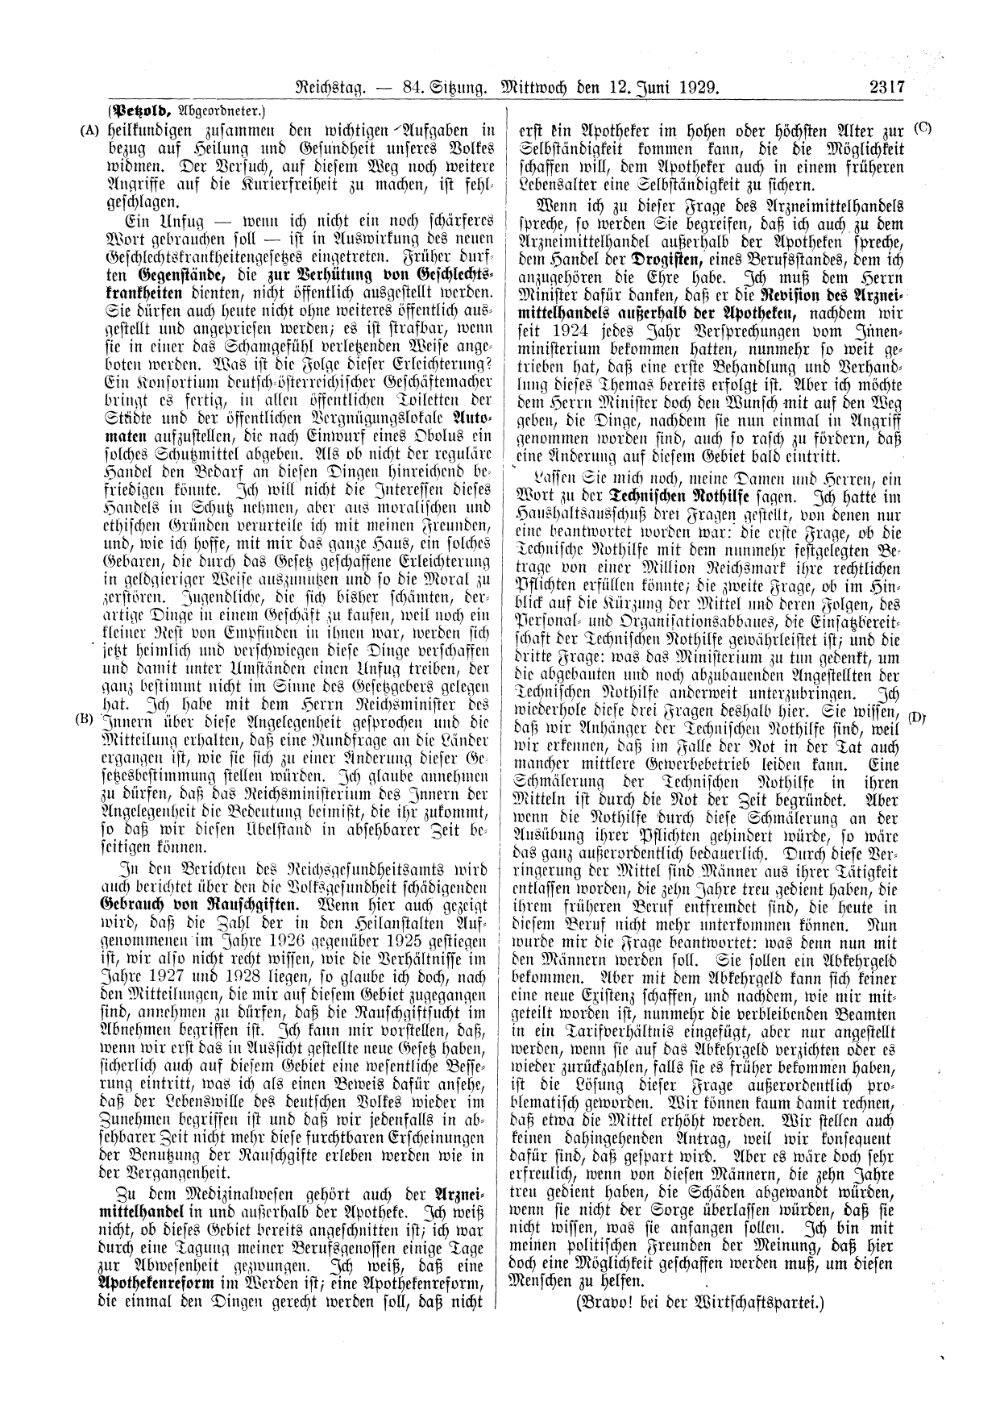 Scan of page 2317